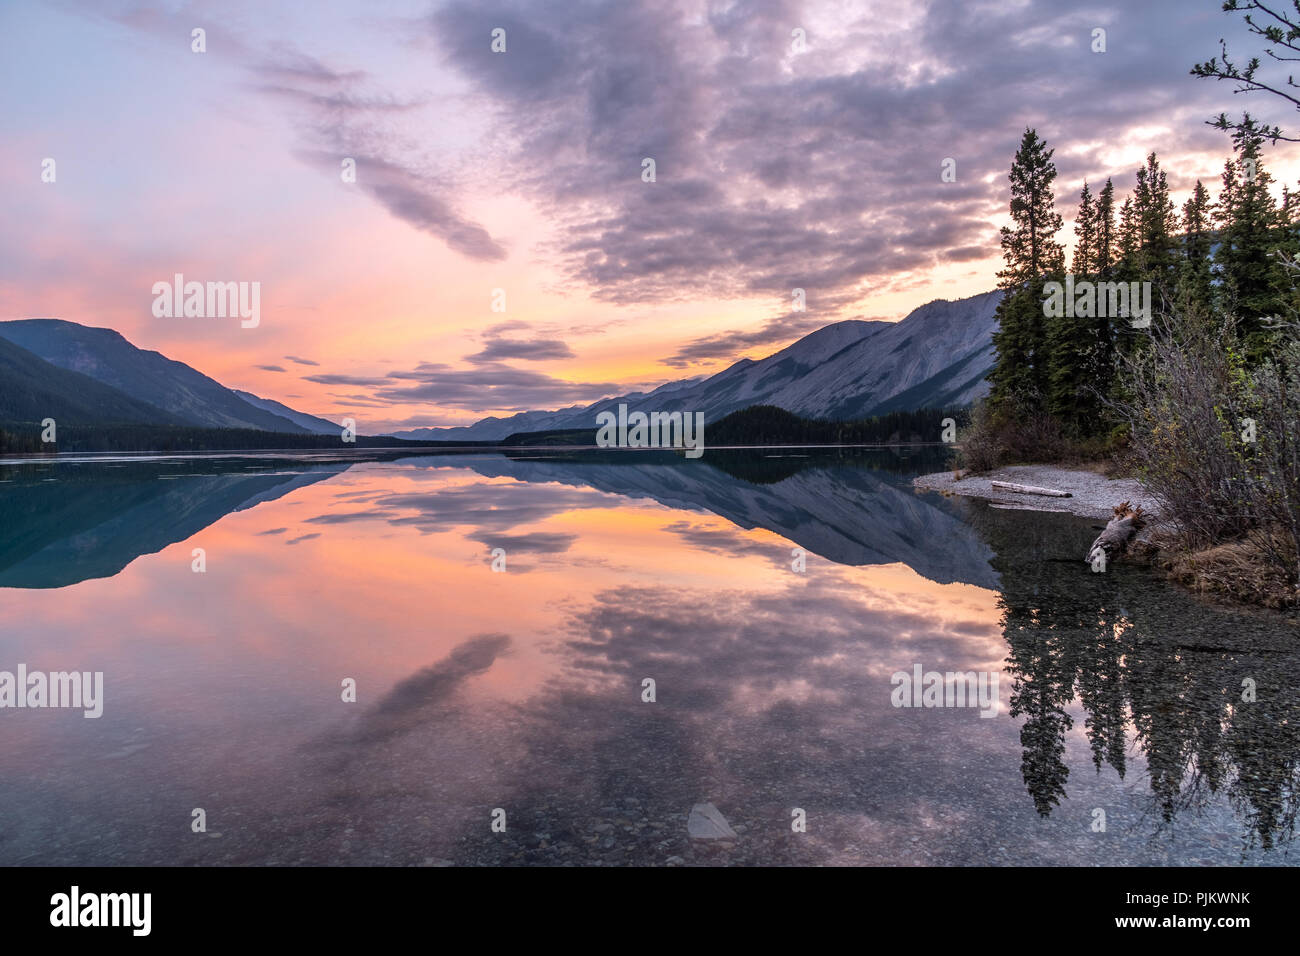 Reflection of early sunrise glowing light on Moncho Lake in the Northern Canadian Rockies Stock Photo